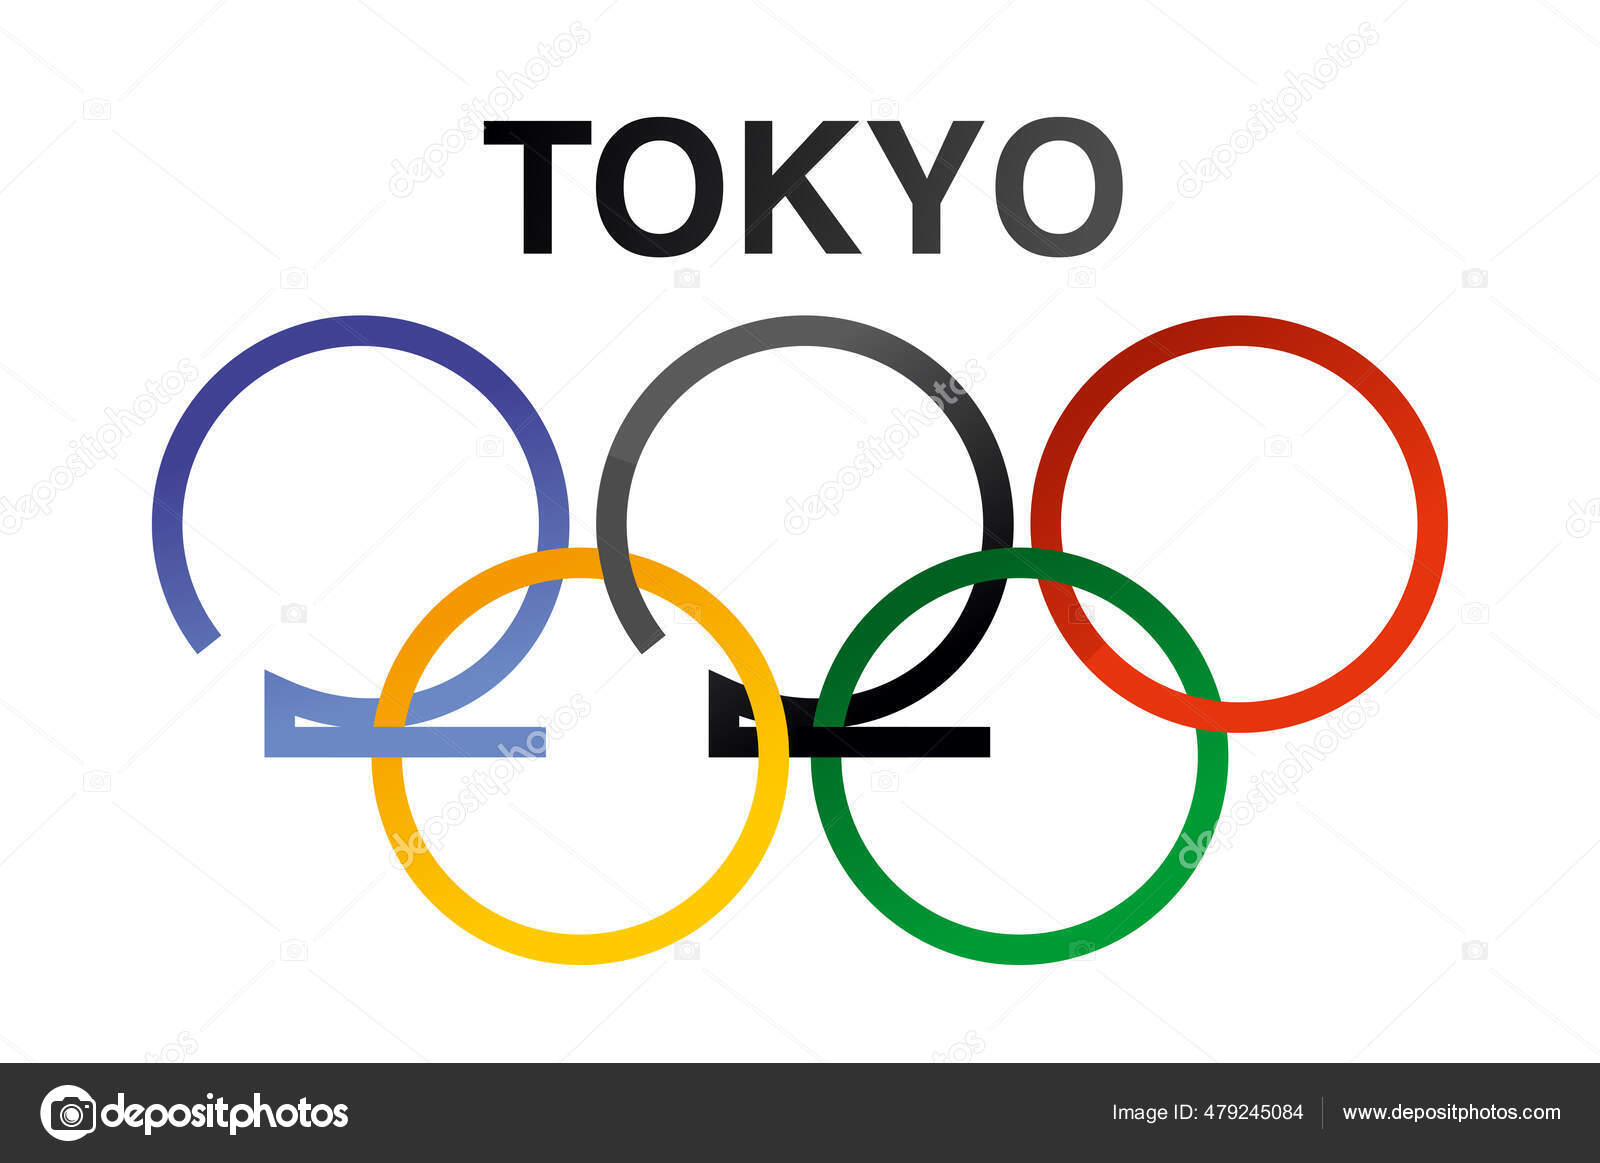 March 19, 2020, Tokyo, Japan: Japanese National Flag over the Olympic Rings  symbol is seen at